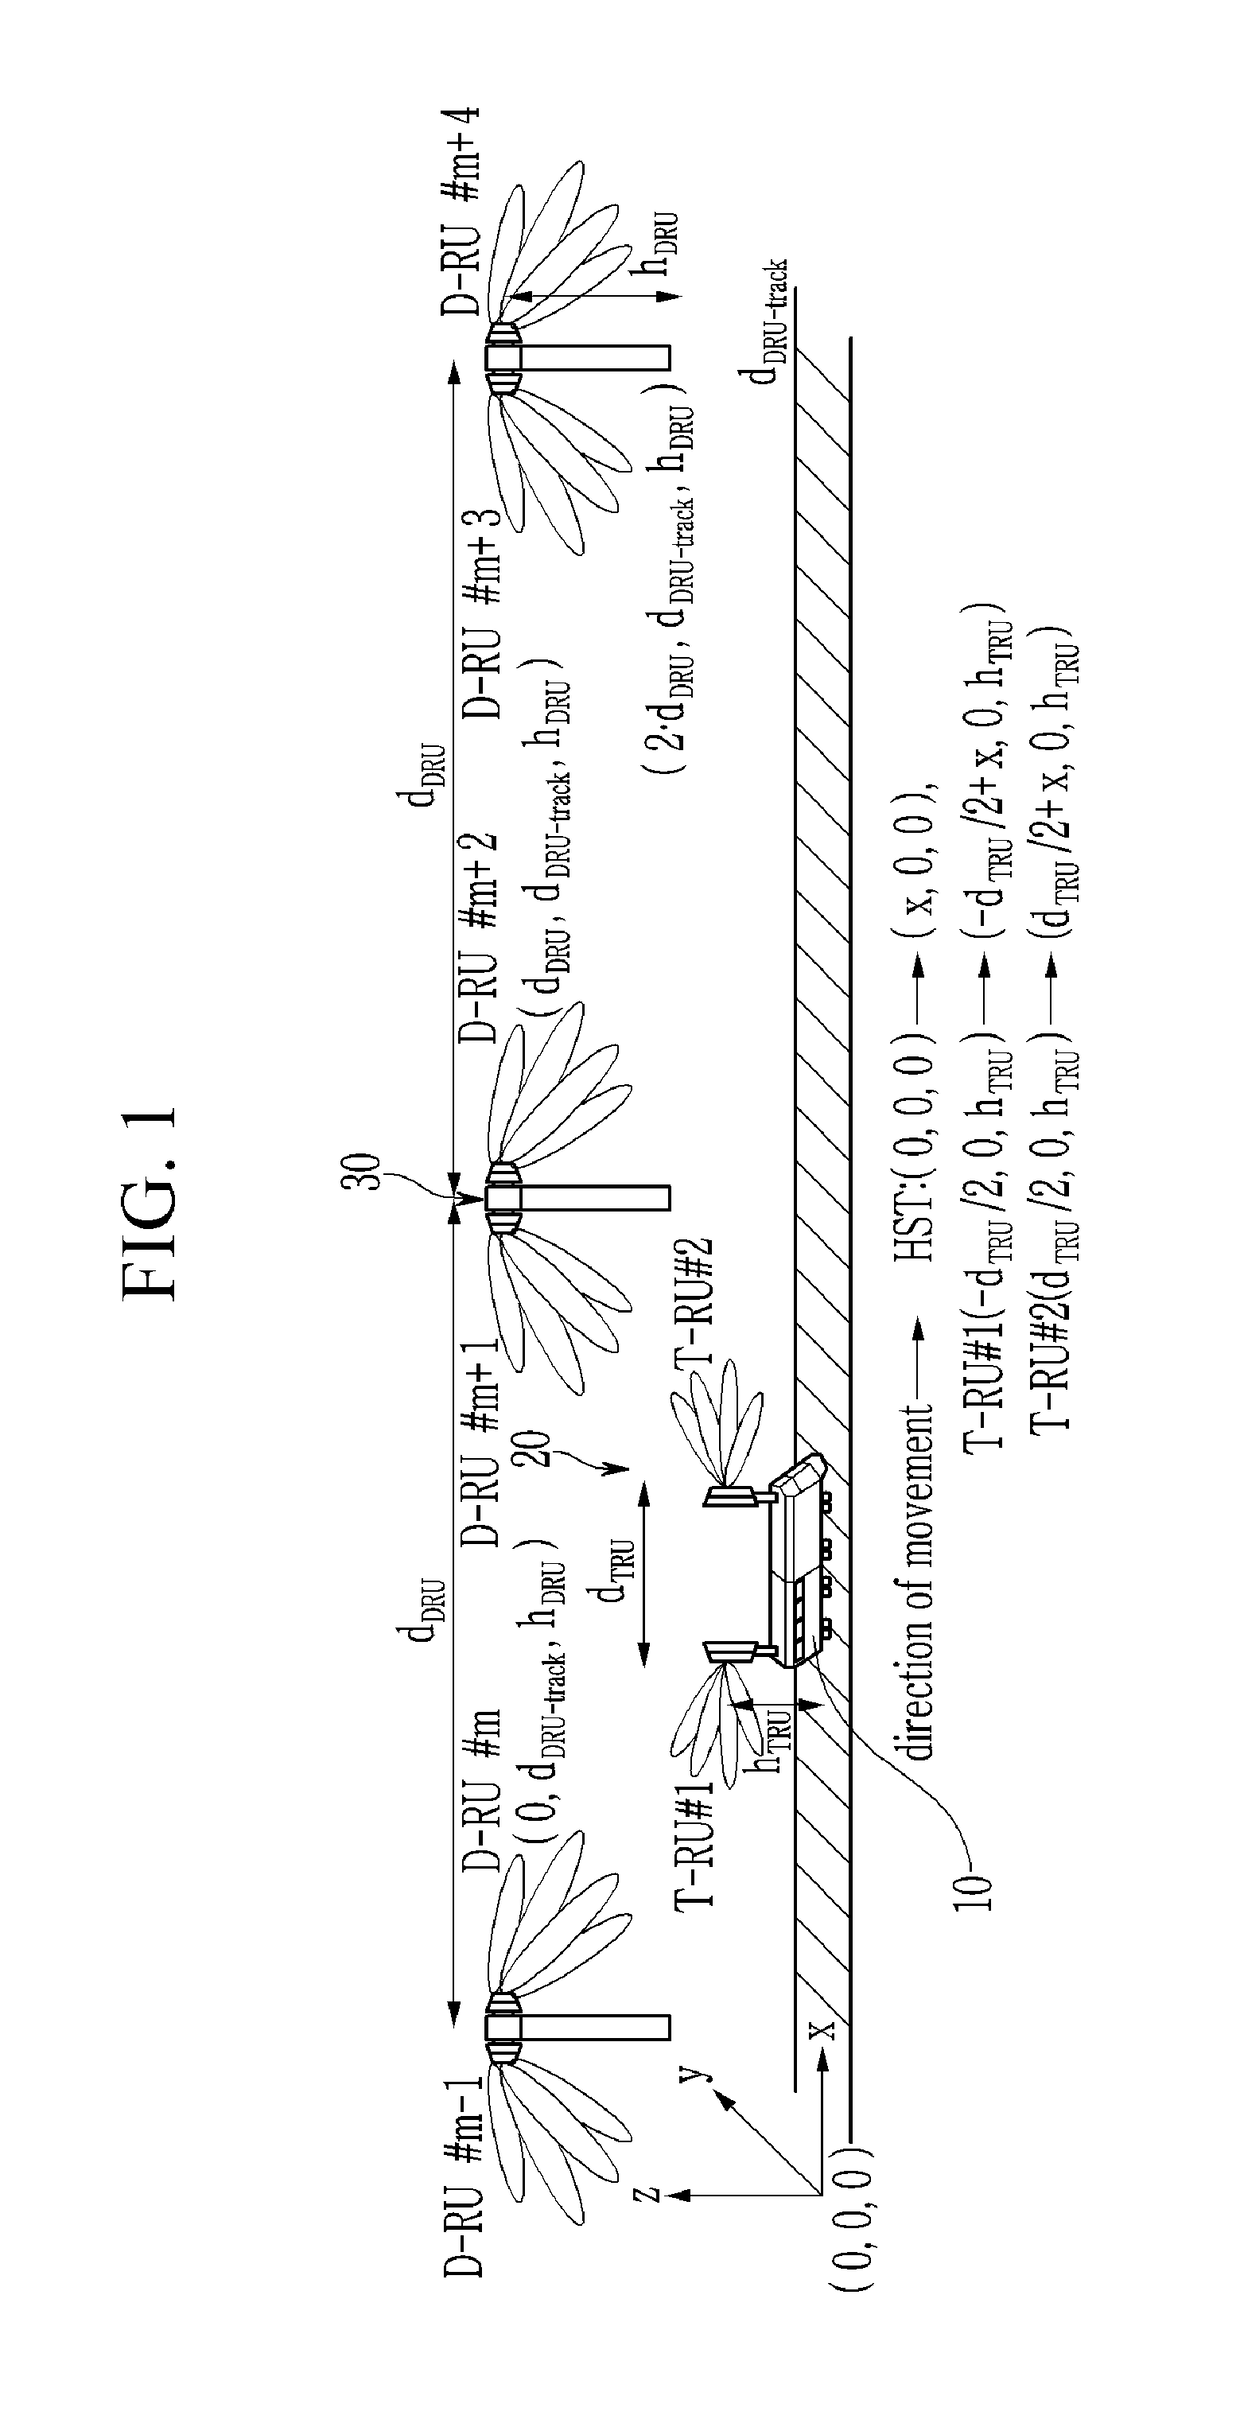 Apparatus and method for beam-forming communication in mobile wireless backhaul network